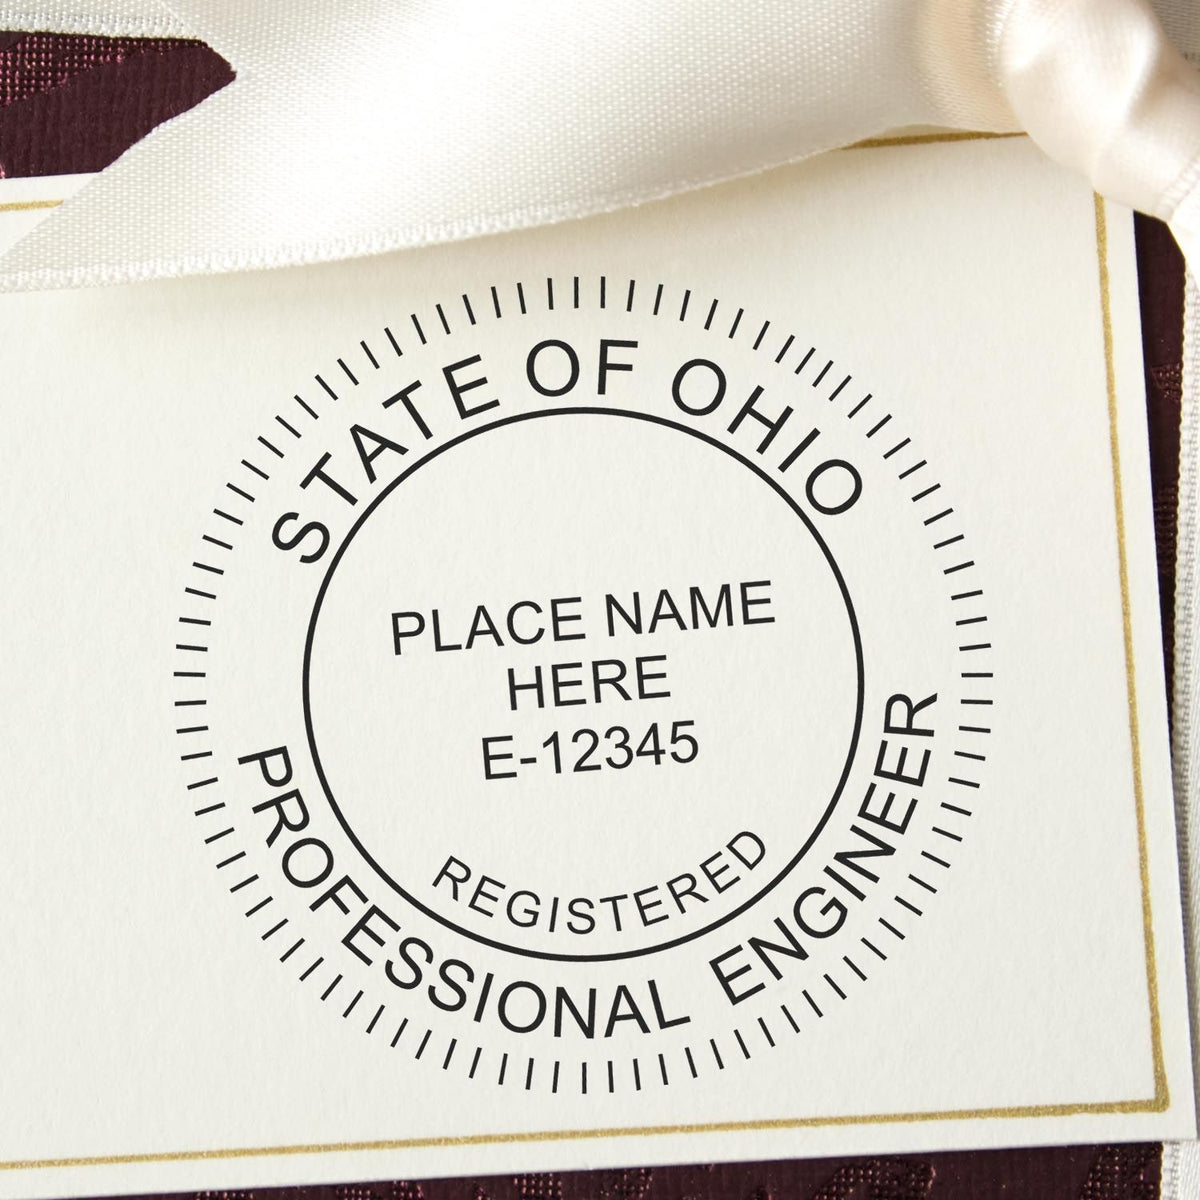 A stamped impression of the Digital Ohio PE Stamp and Electronic Seal for Ohio Engineer in this stylish lifestyle photo, setting the tone for a unique and personalized product.